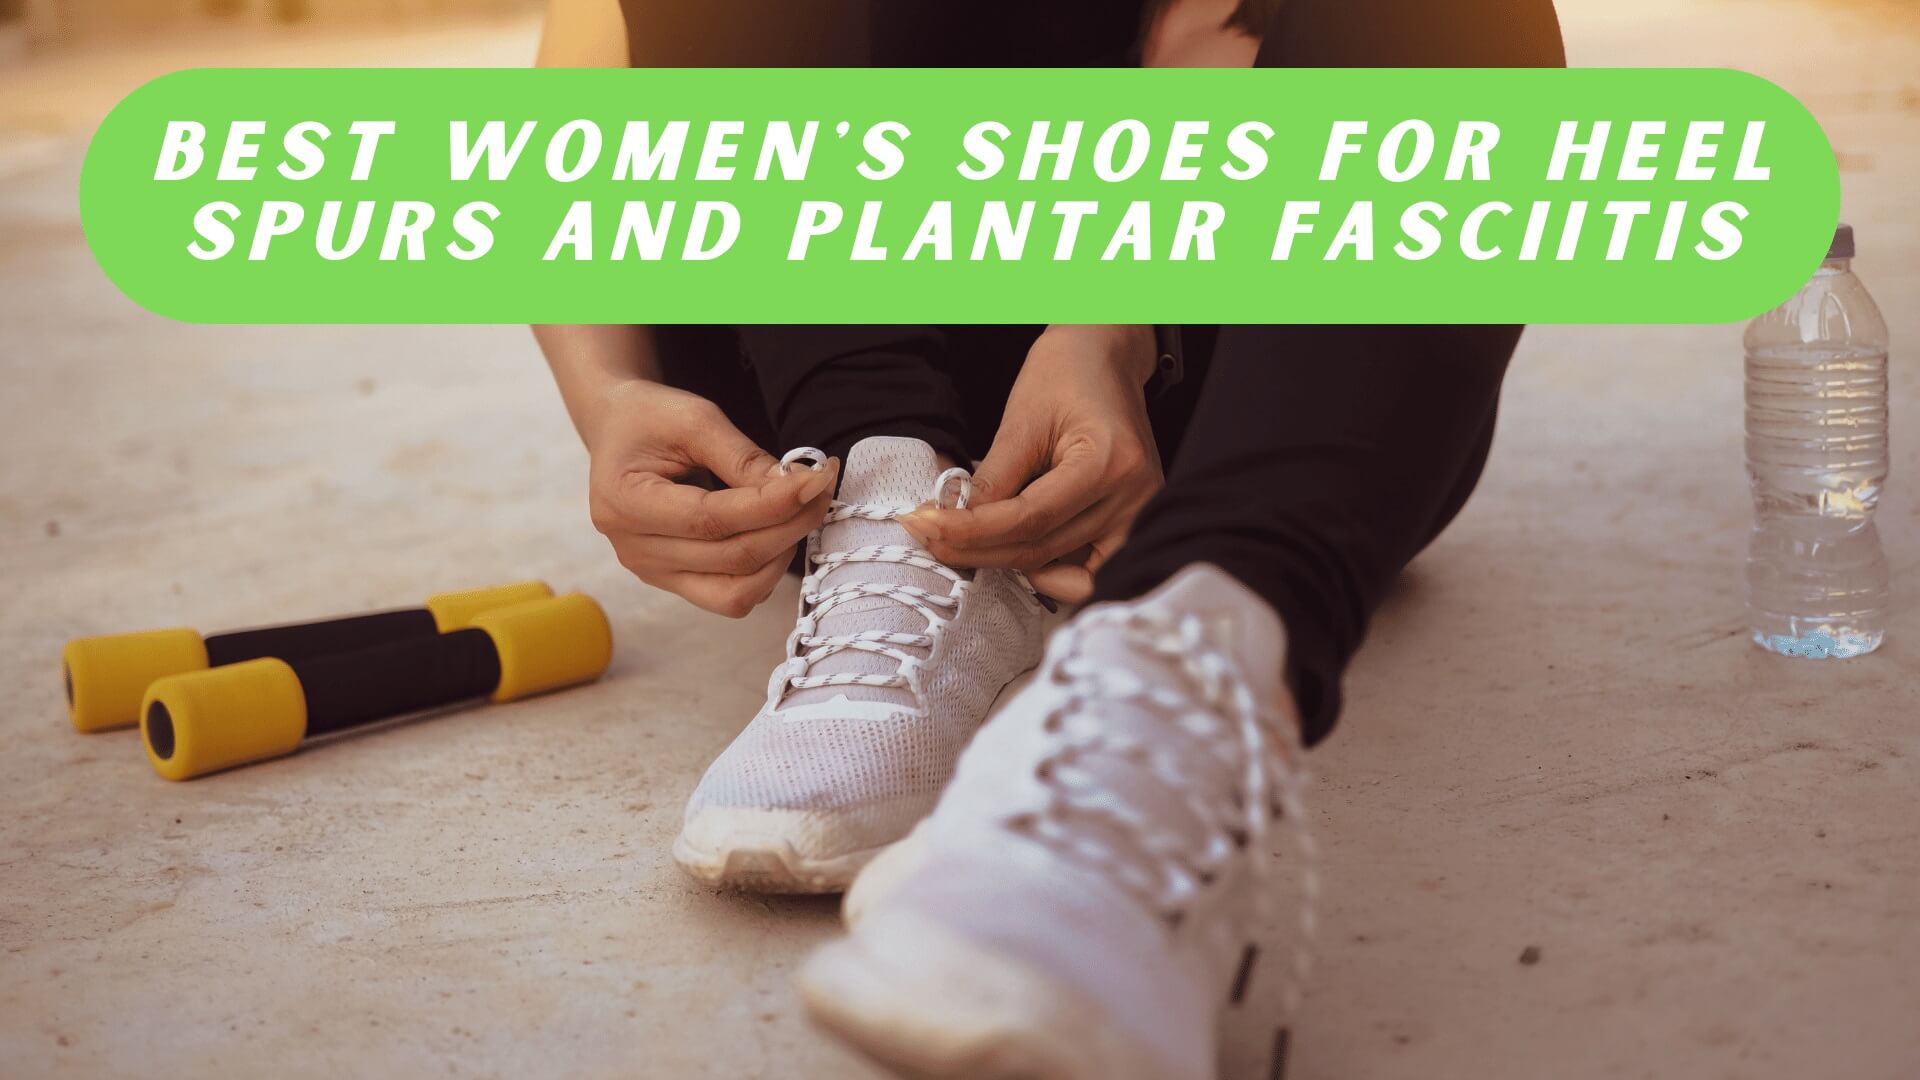 Best Women's Shoes for Heel Spurs and Plantar Fasciitis